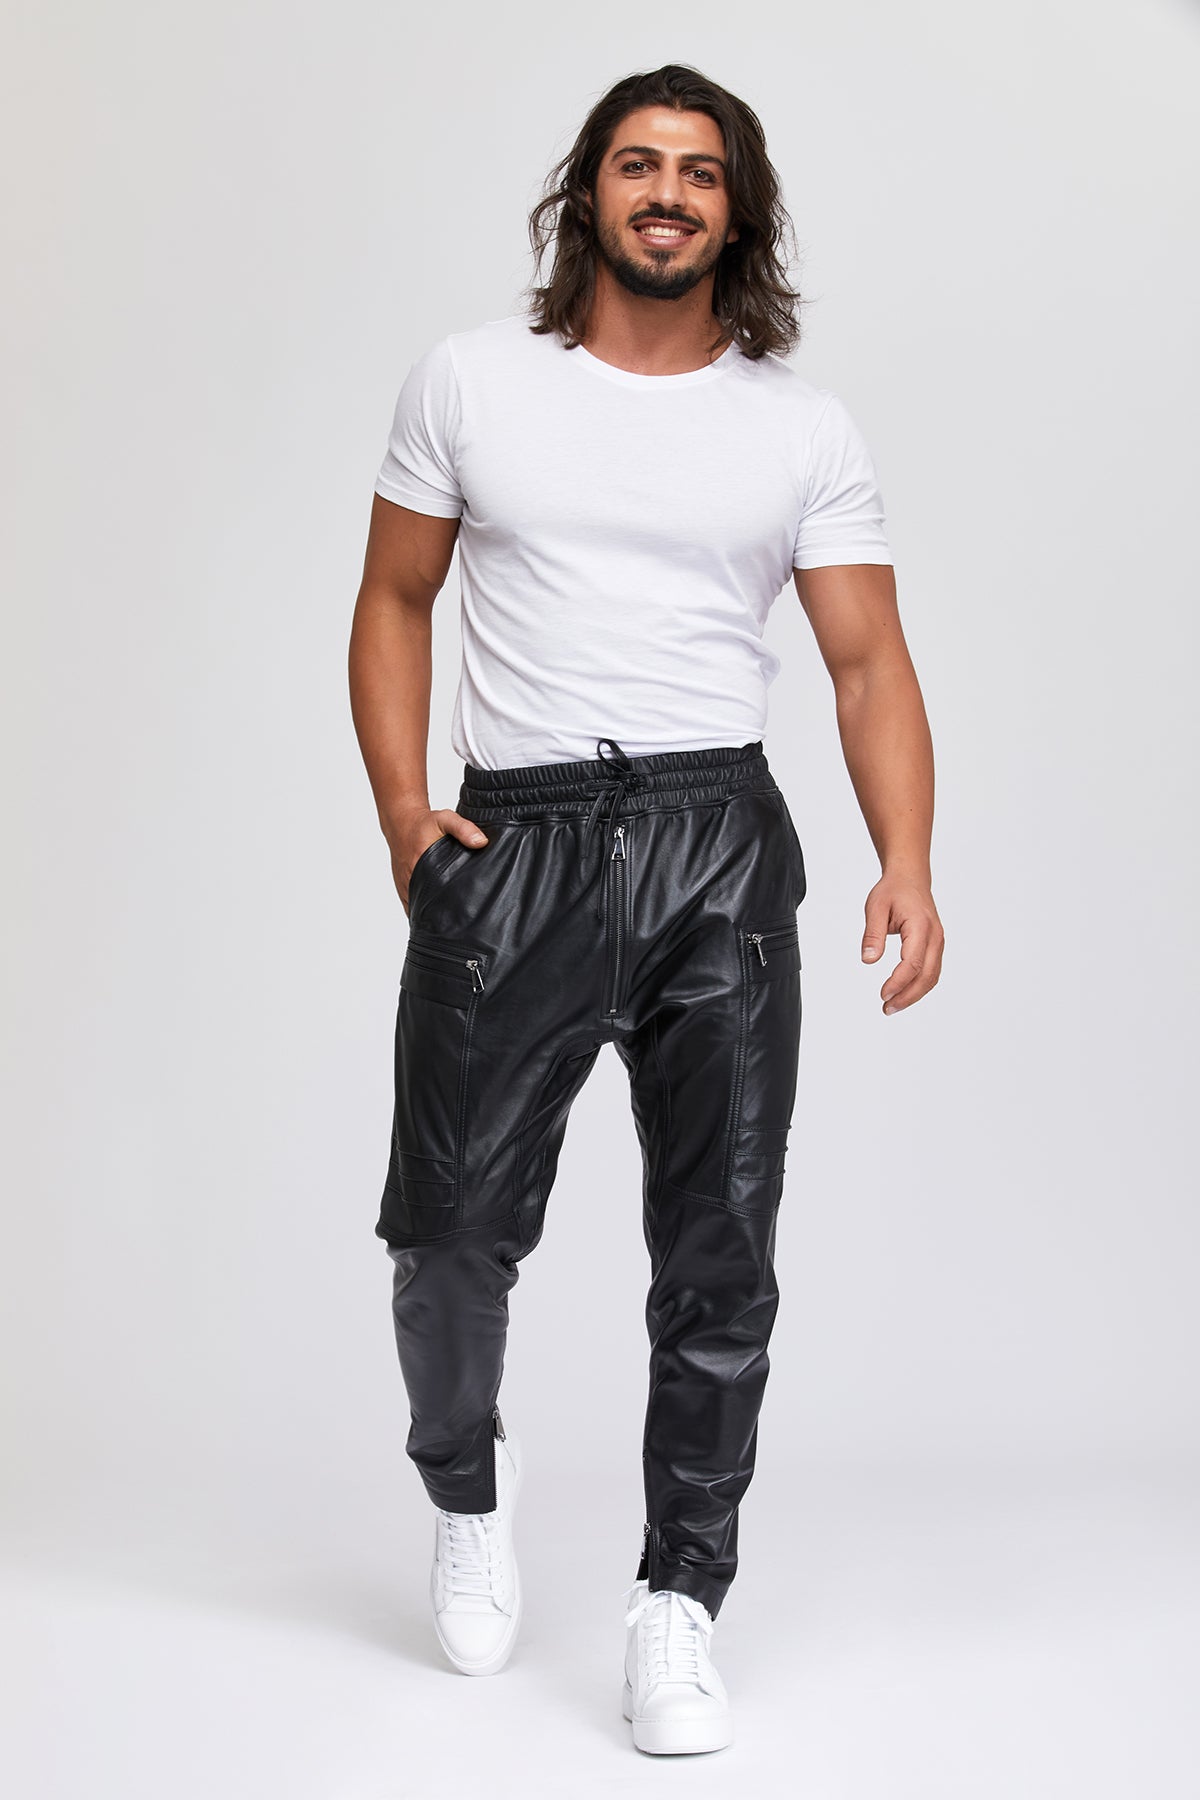 Men's loose fit Leather Pants. 100% High-End Quality Turkish Leather. Lambskin. Cold Weather Essentials. Elastic waistband. Side pockets.